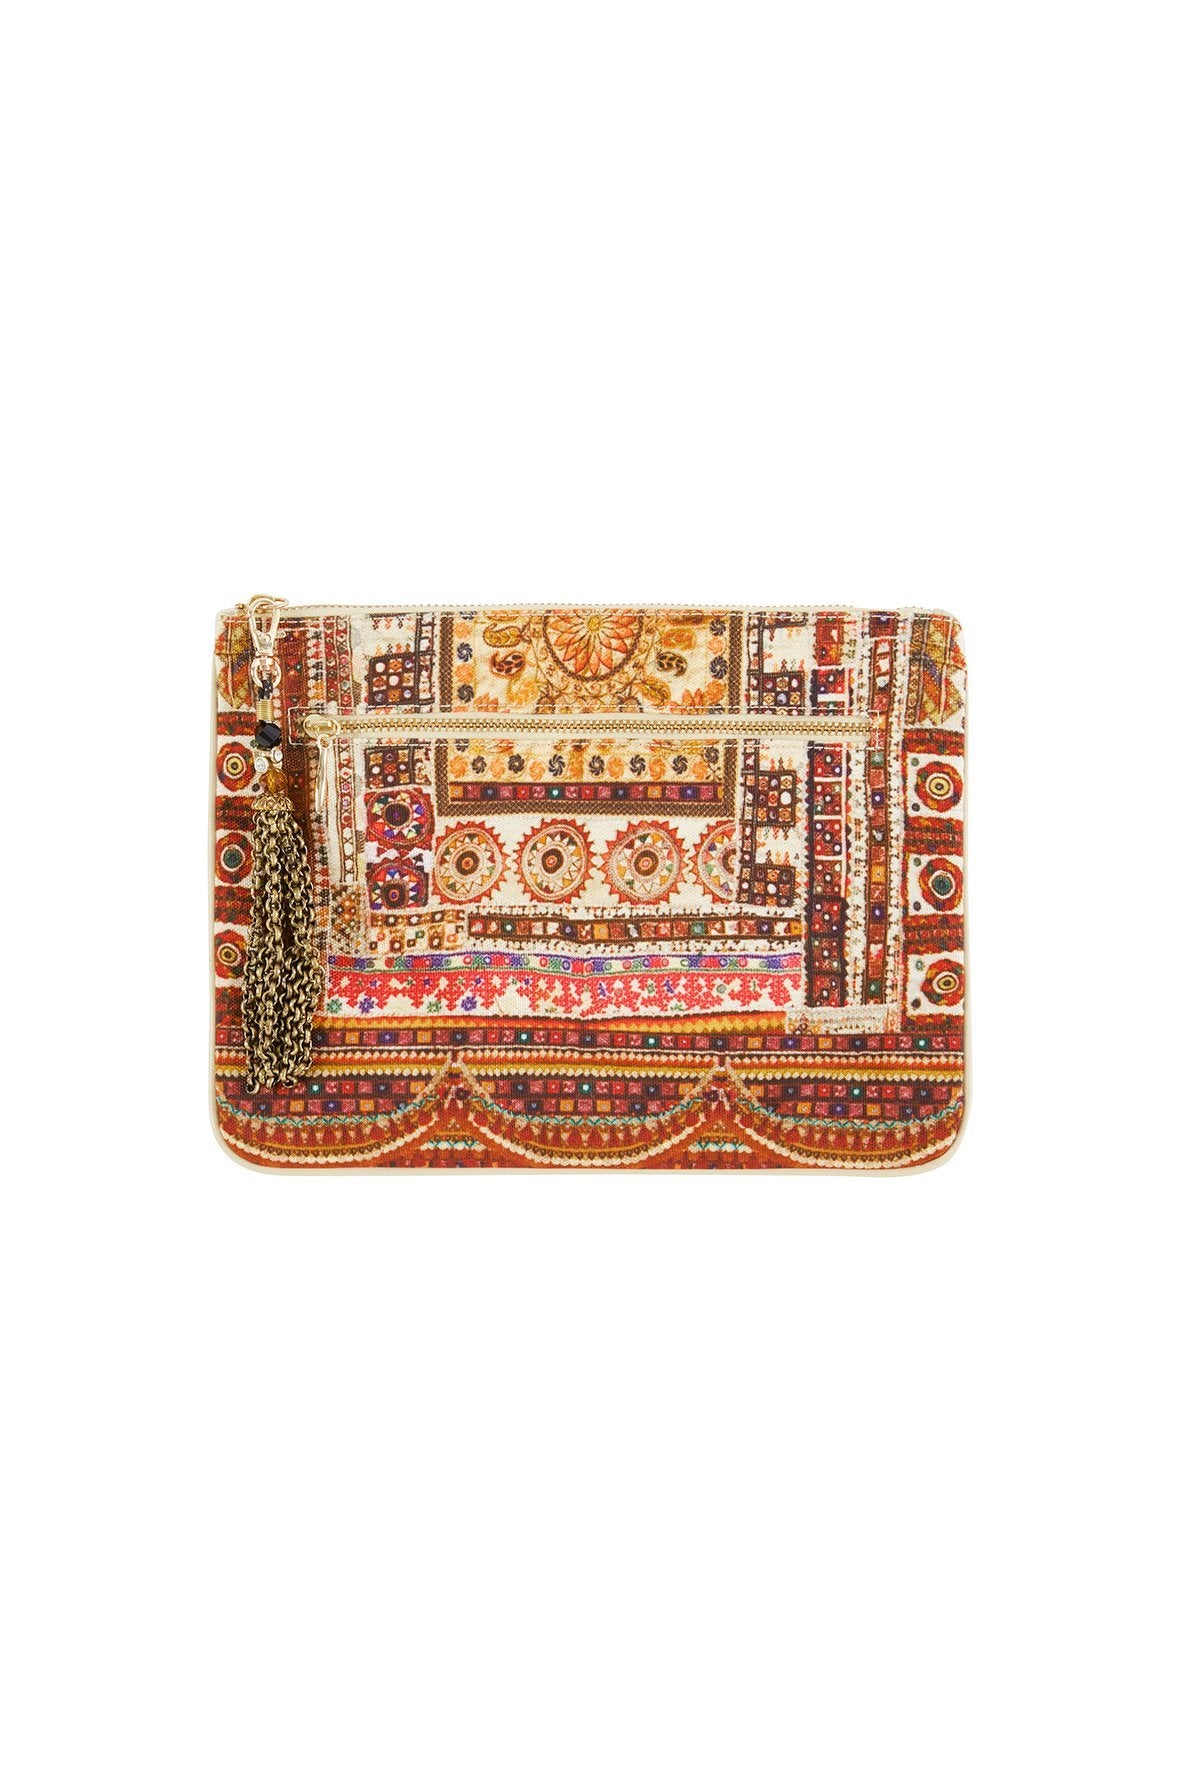 INDIANA FRANKS SMALL CANVAS CLUTCH